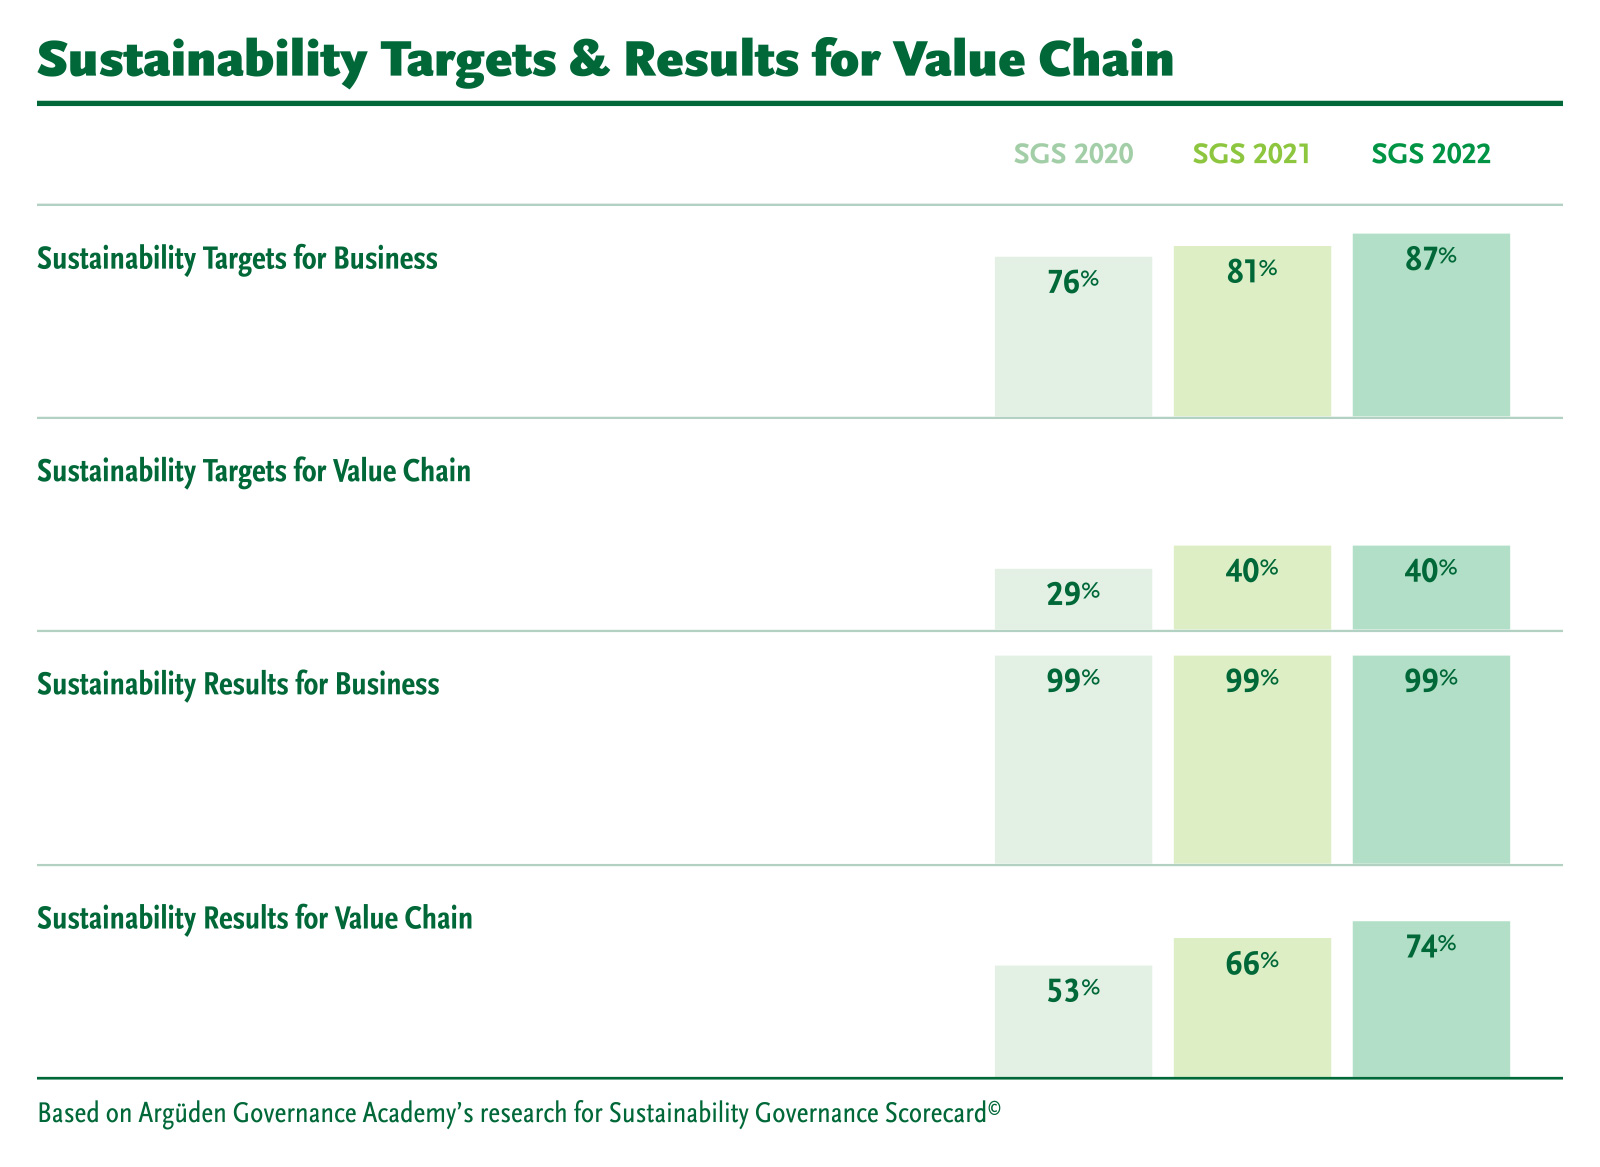 SGS 2022 Sustainability Targets and Results for Value Chain